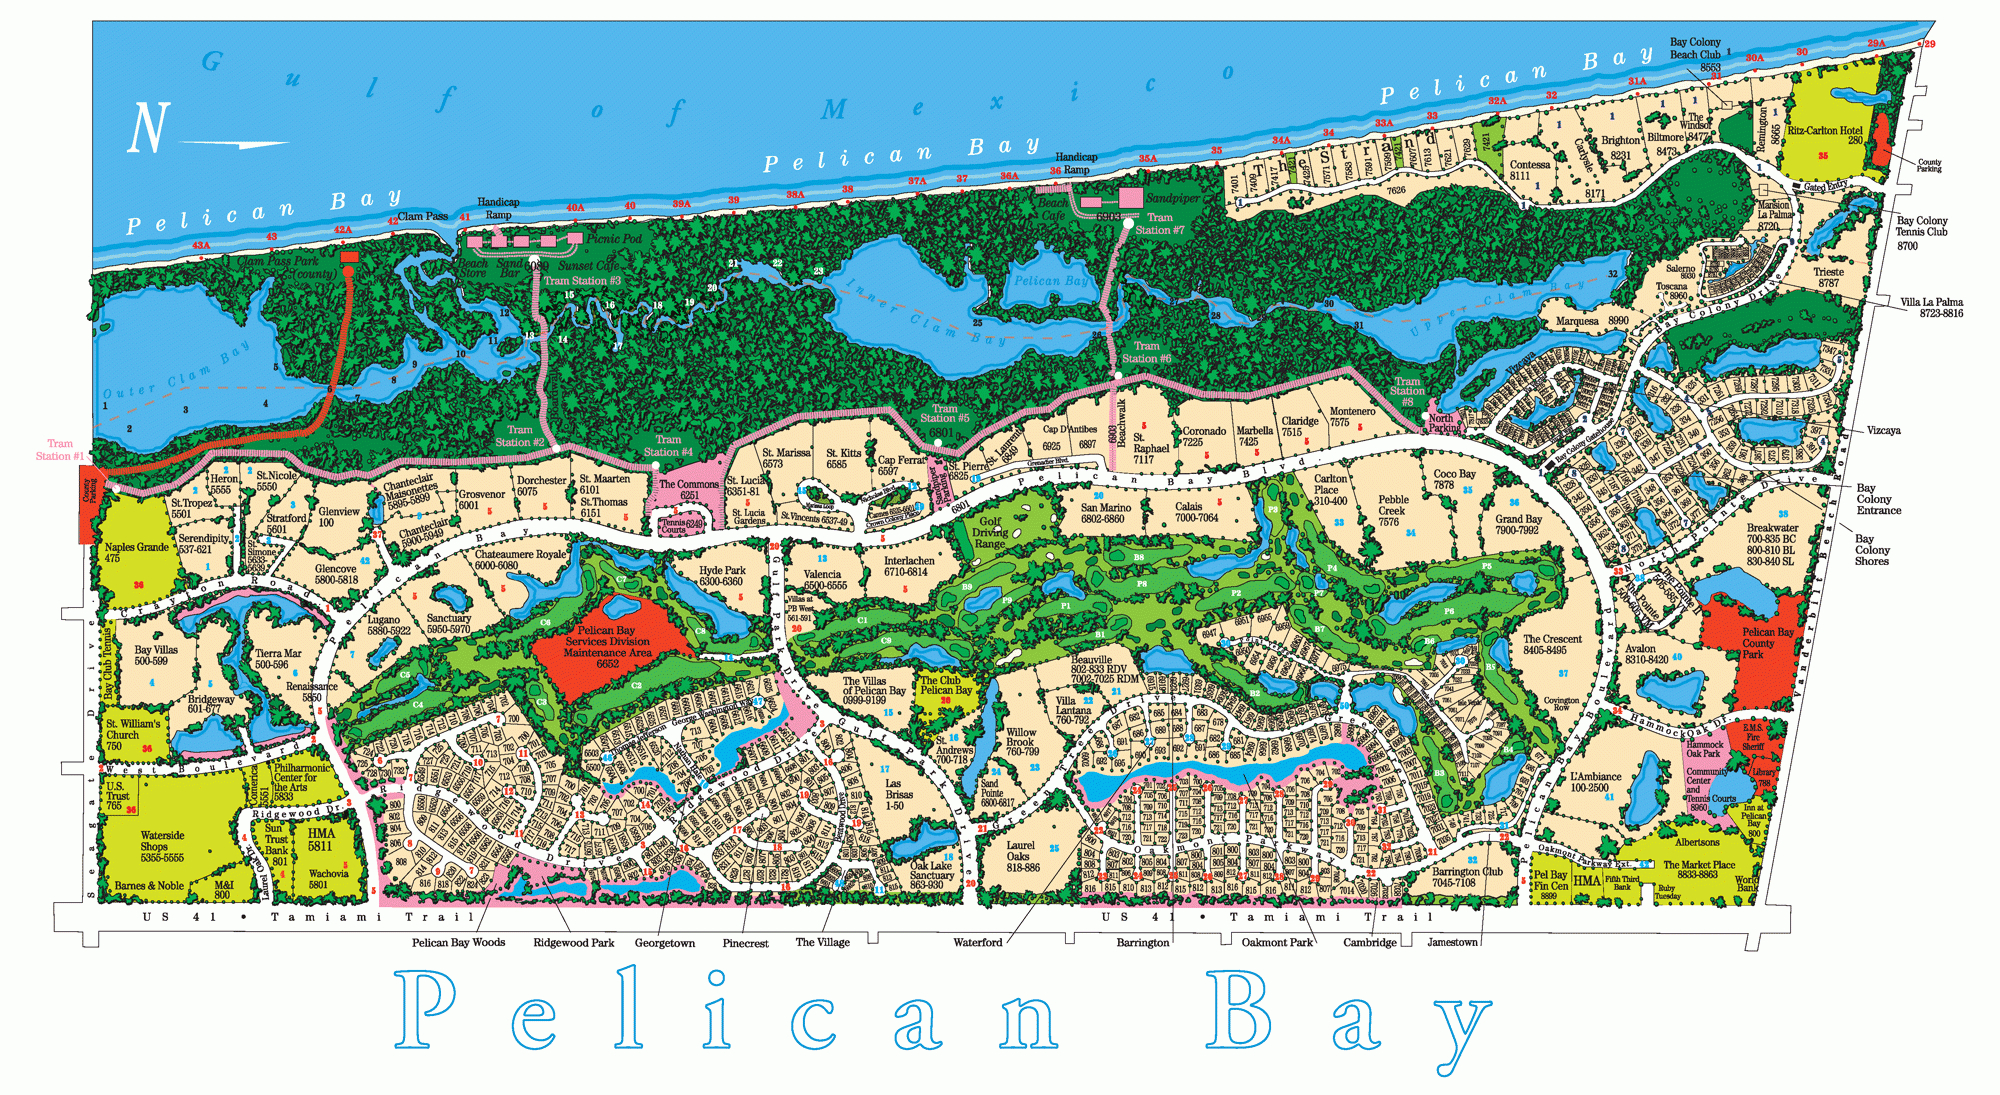 Pelican Bay Homes For Sale | Bartley Realty Lllp - Pelican Bay Florida Map